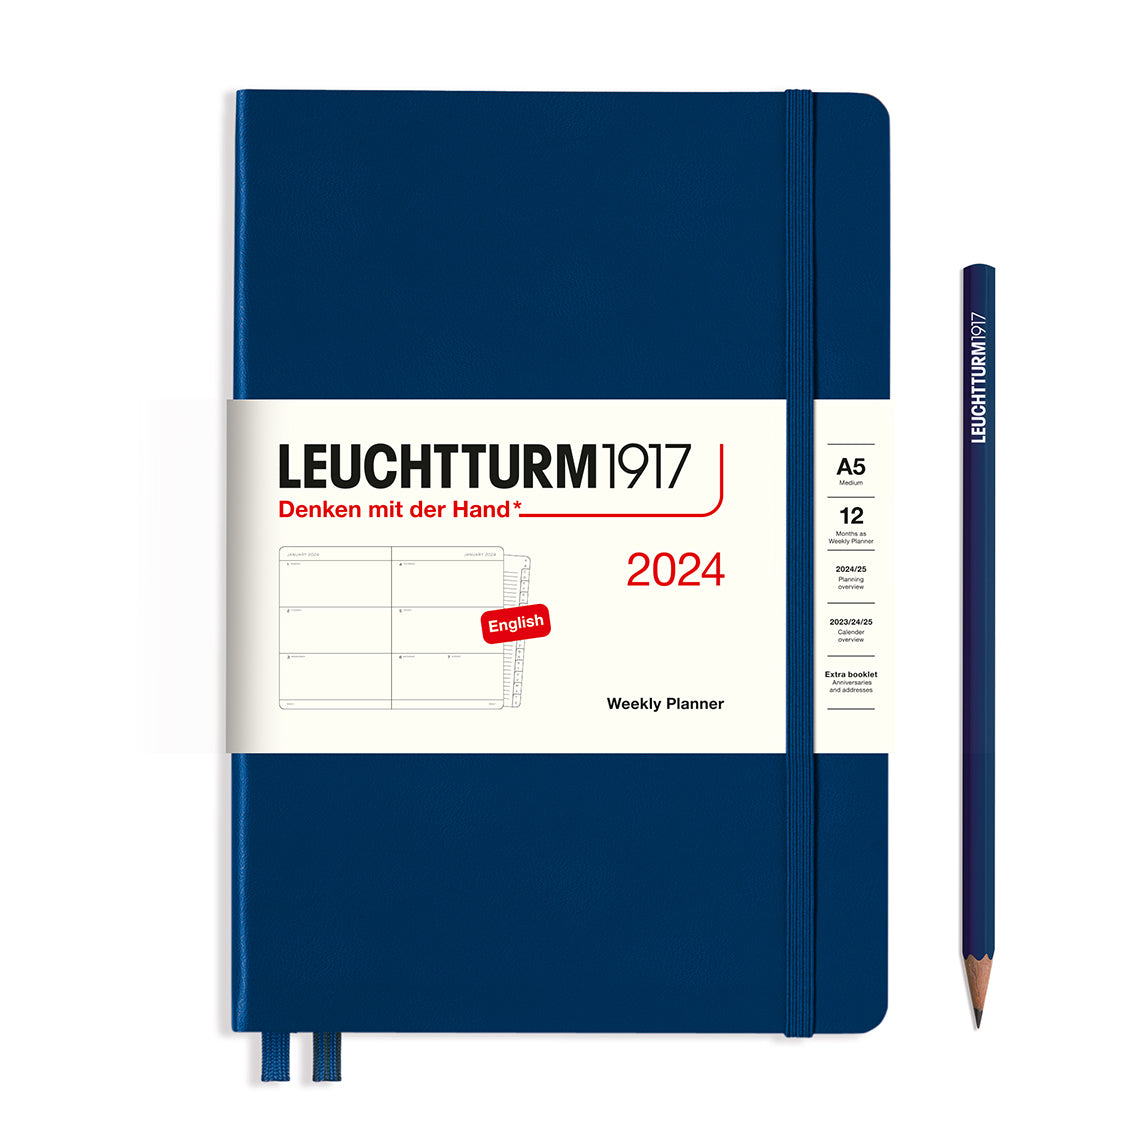 An image of a navy planner with a navy elastic band holding it together and a cream paper wrap around the middle stating the business name Leuchtturm1917, that it is for the year 2024, it is a weekly planner, is A5 in size and an English language version. It has an image on the wrap showing the inside layout which is a week spread across 2 pages. A navy pencil is shown at the side of the planner.